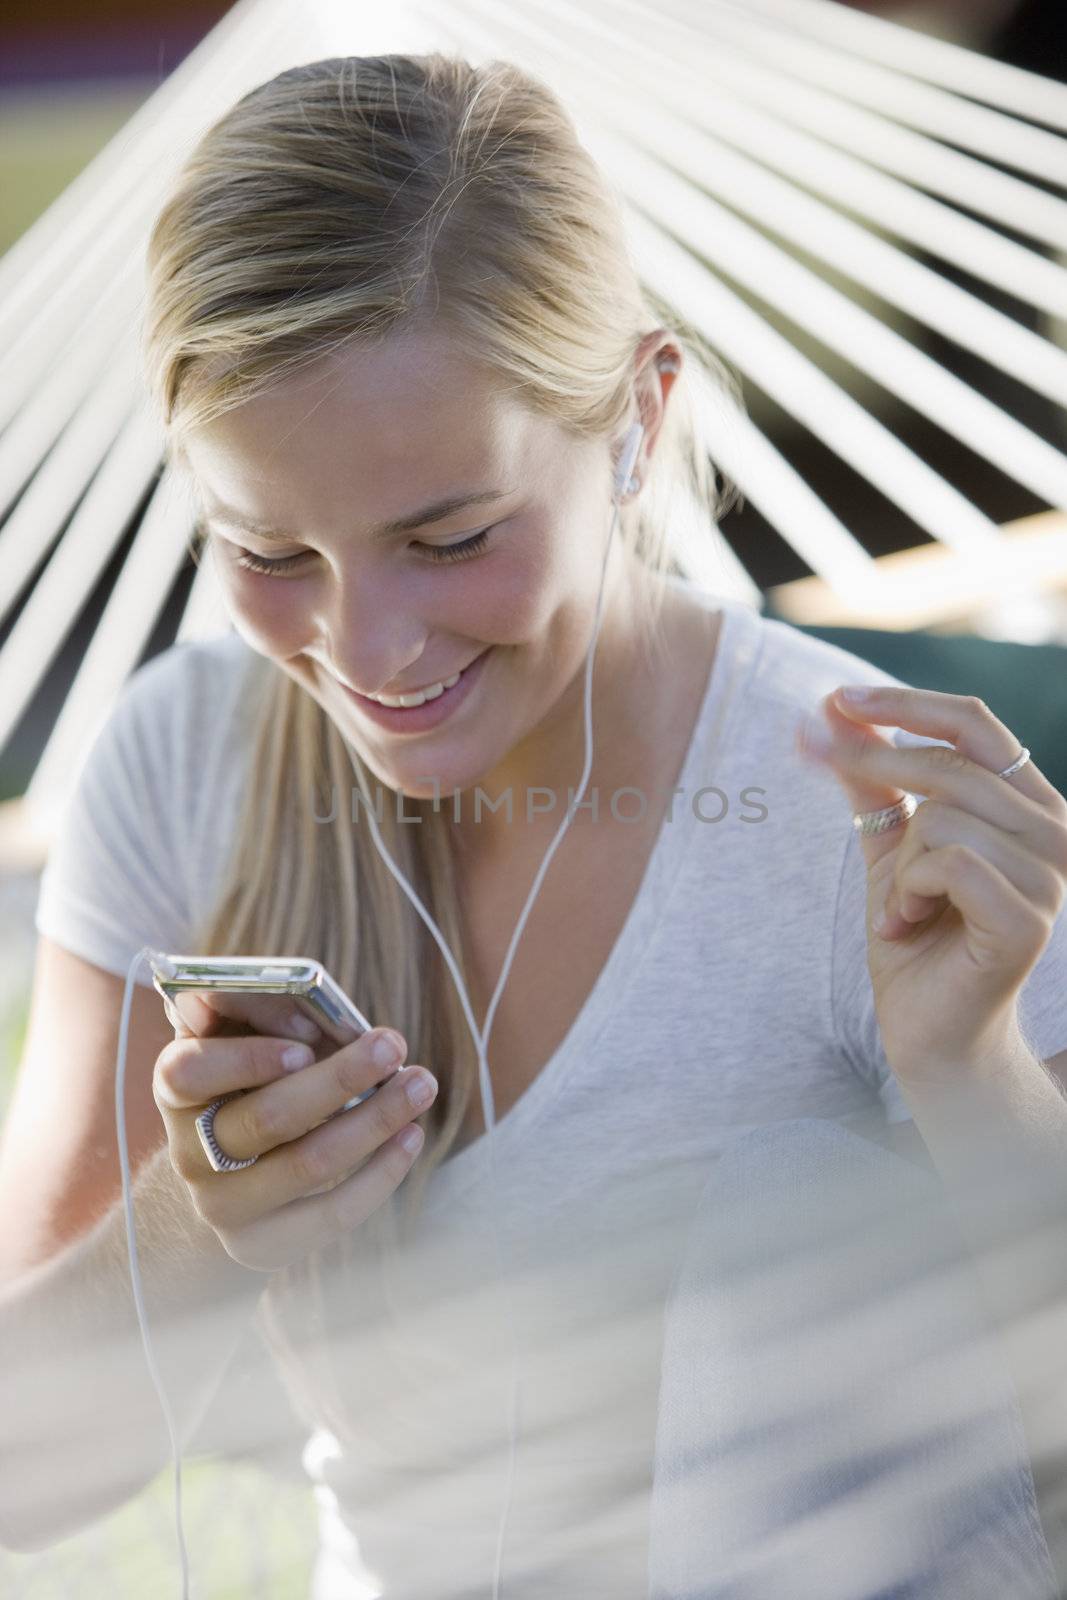 Girl listening to MP3 player and snapping fingers by edbockstock